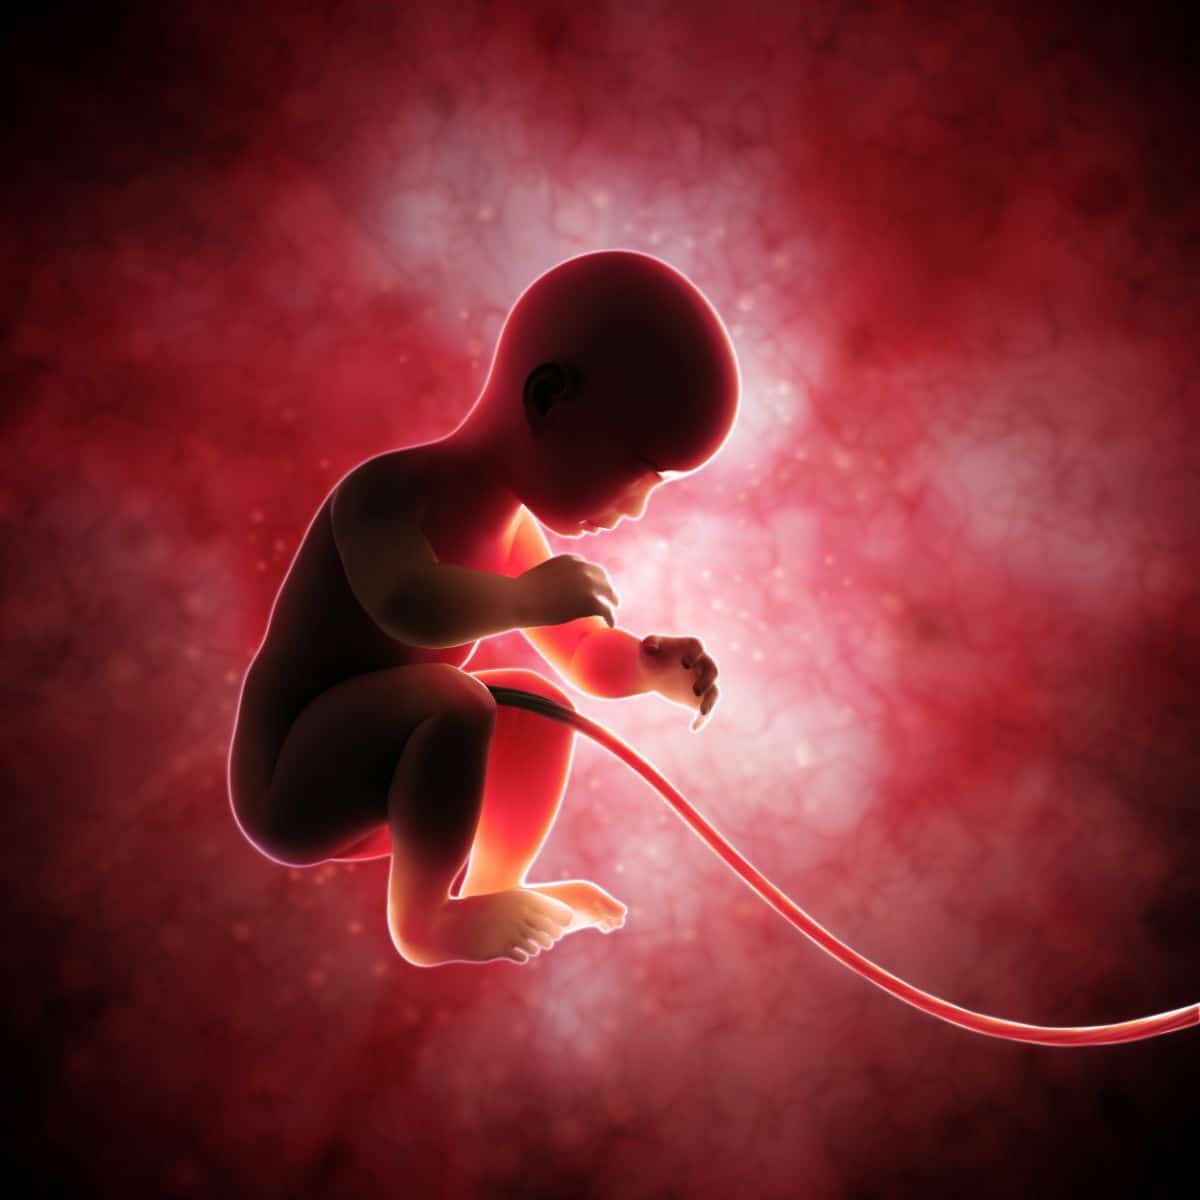 The spiritual meaning of having an umbilical cord stuck around the neck